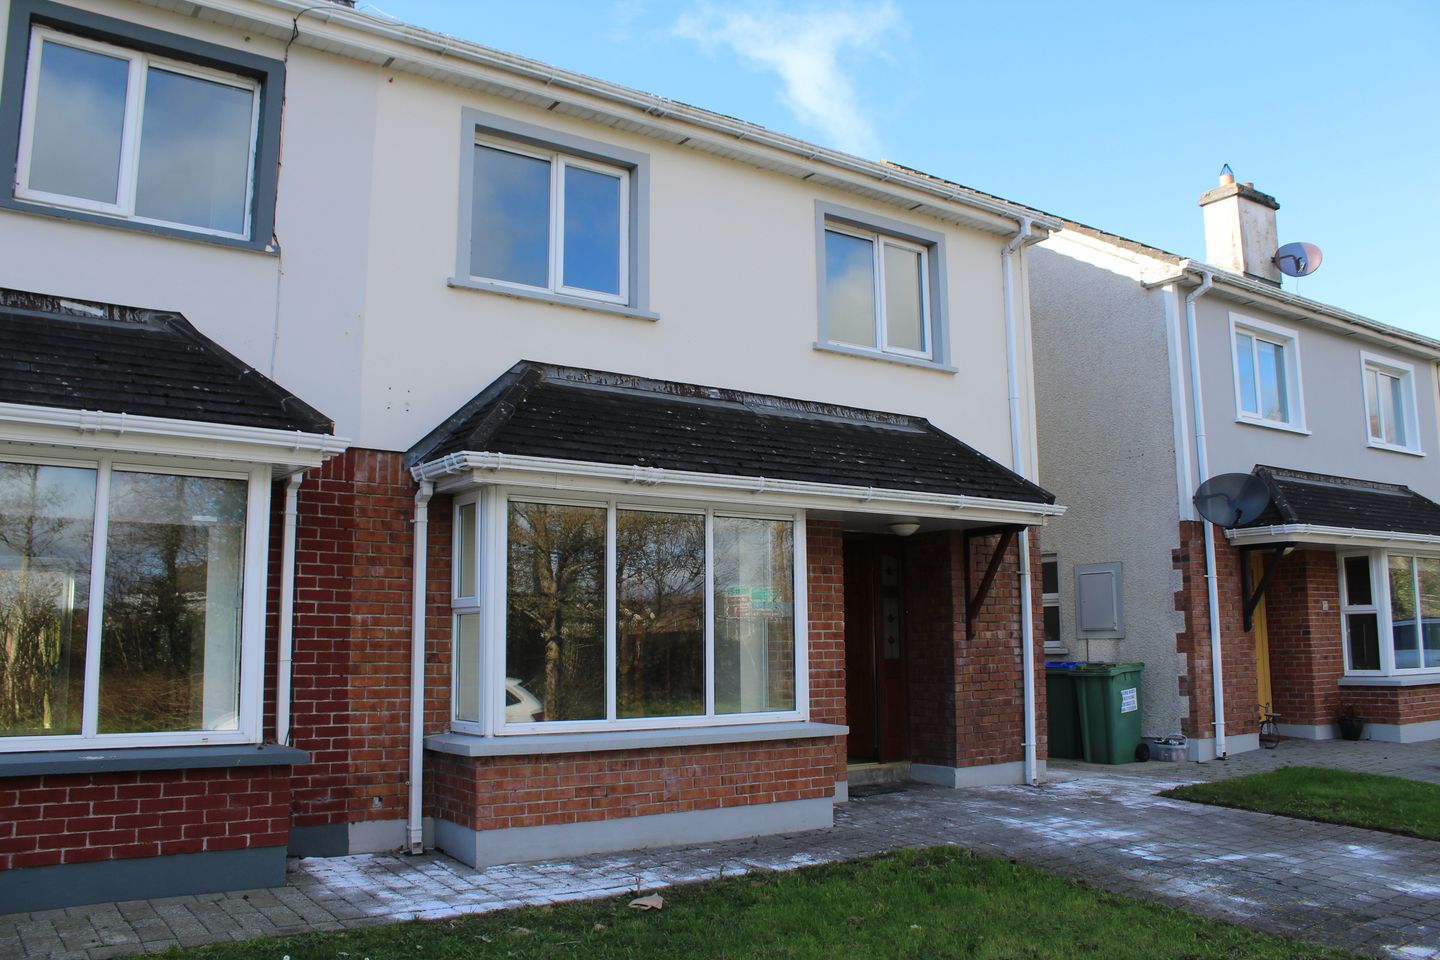 3 Cois Abhann, Caherweesheen, Tralee, Co. Kerry